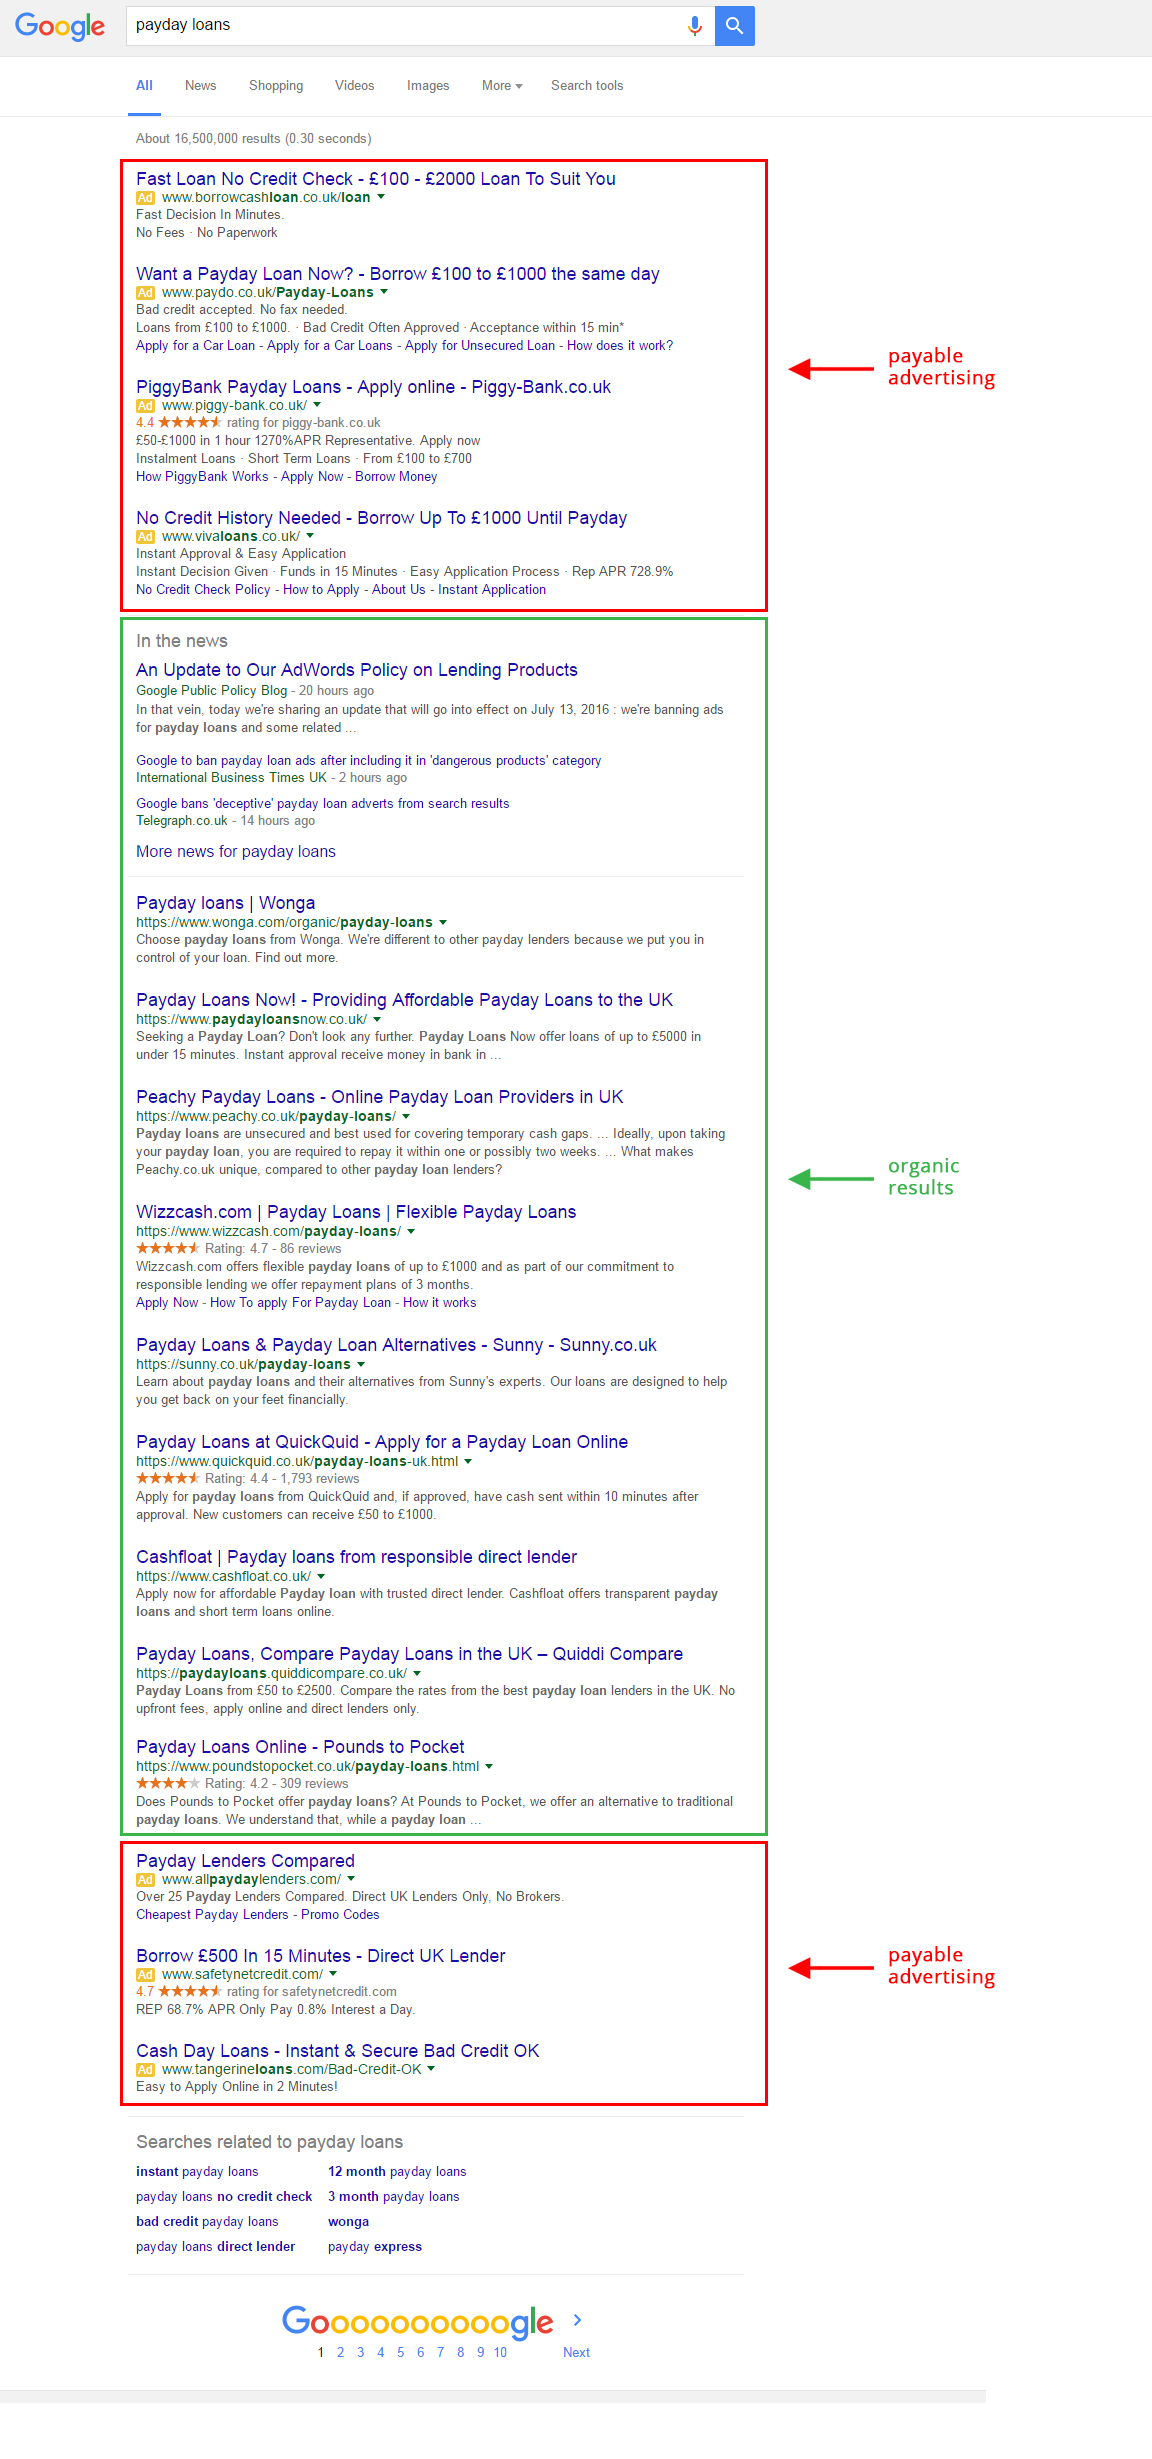 SERP - Search Engine Result Page